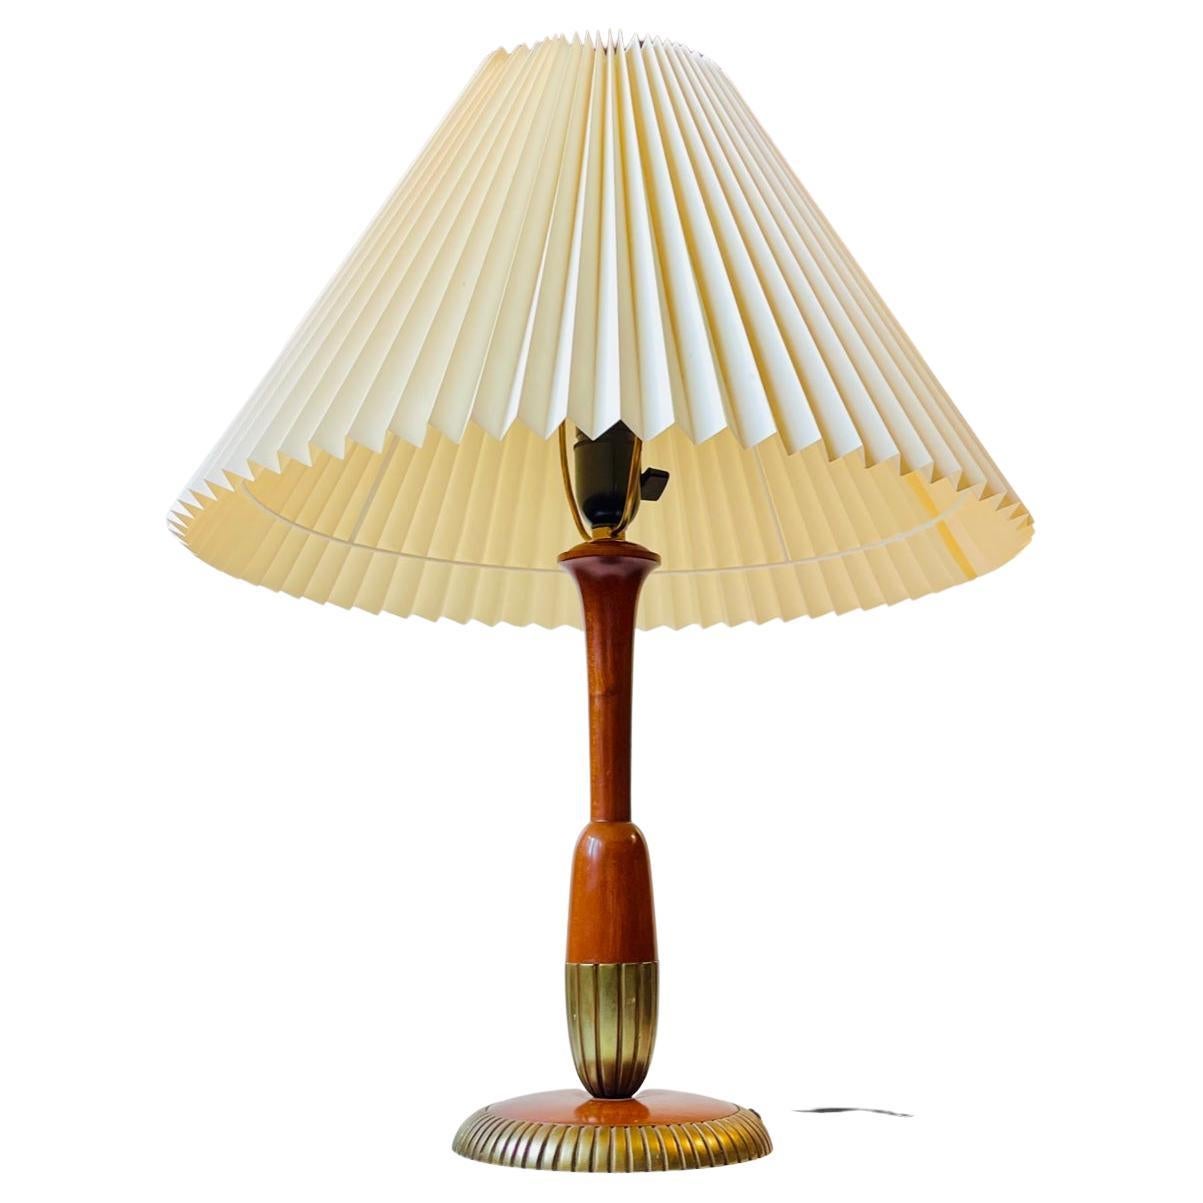 Scandinavian Modern Table Lamp in Walnut and Brass, 1950s For Sale